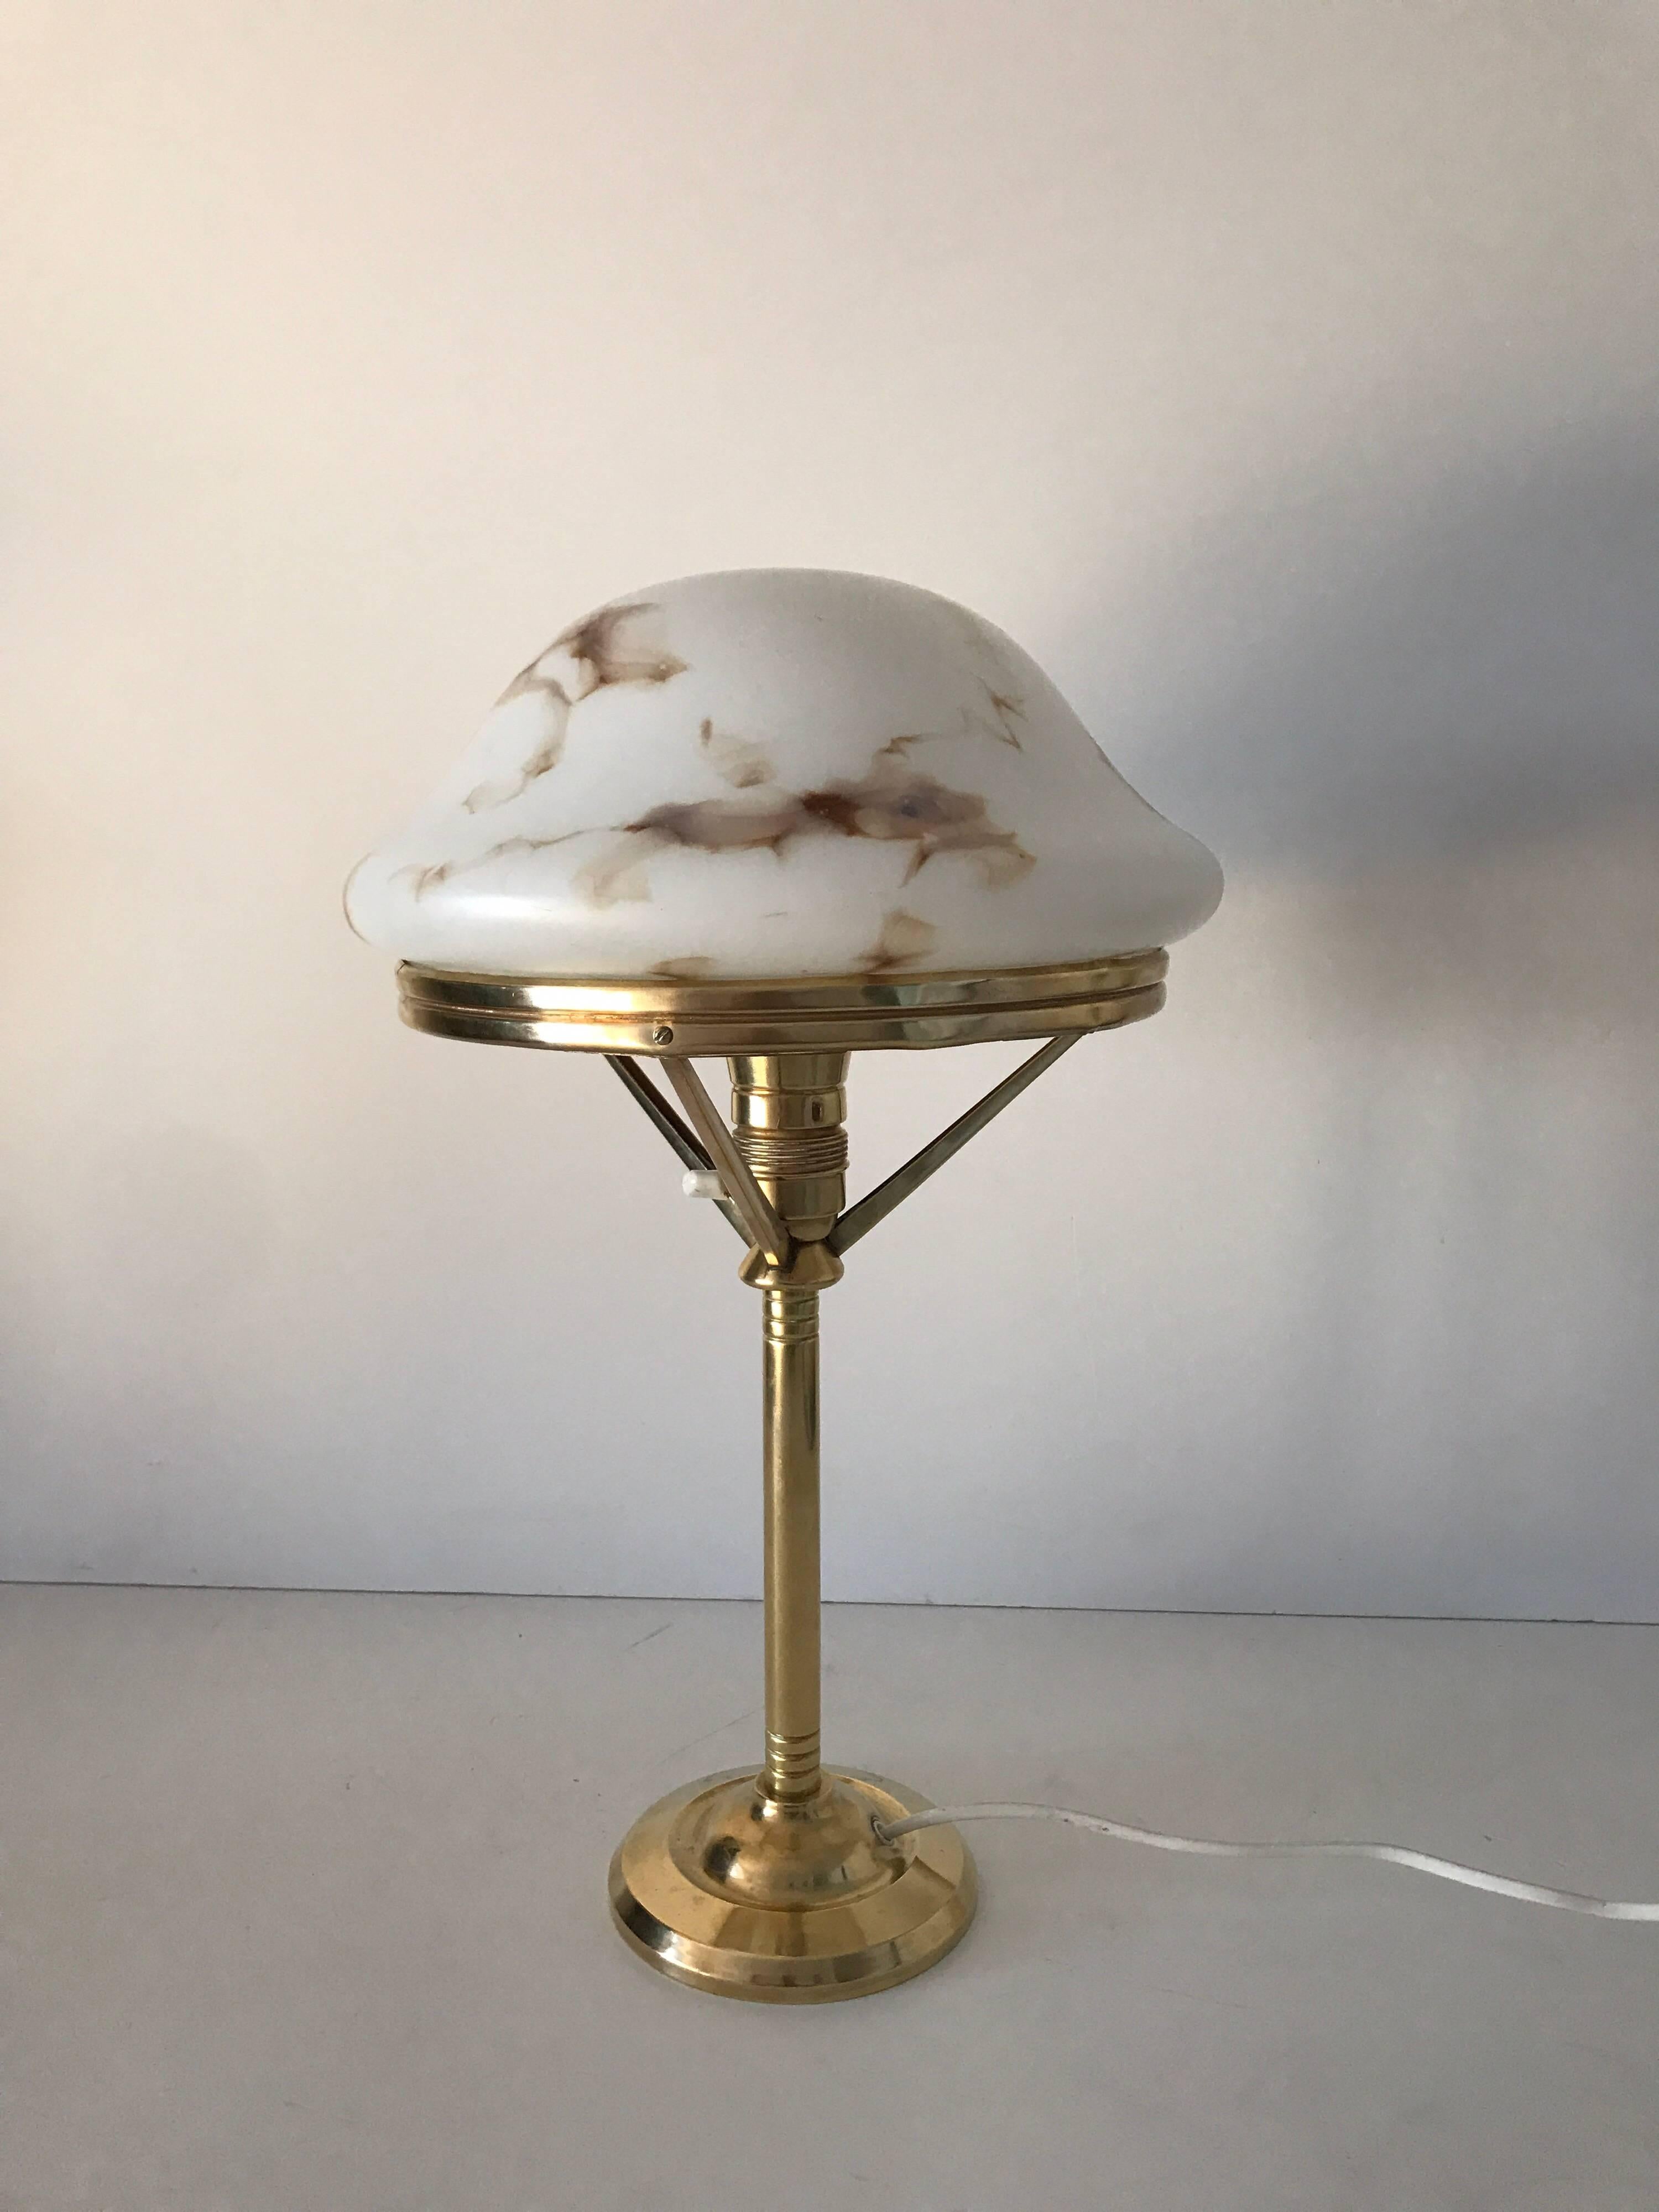 Early 20th Century 1920 Swedish Art Nouveau Jugendstil Brass and Art Glass Table Lamp For Sale